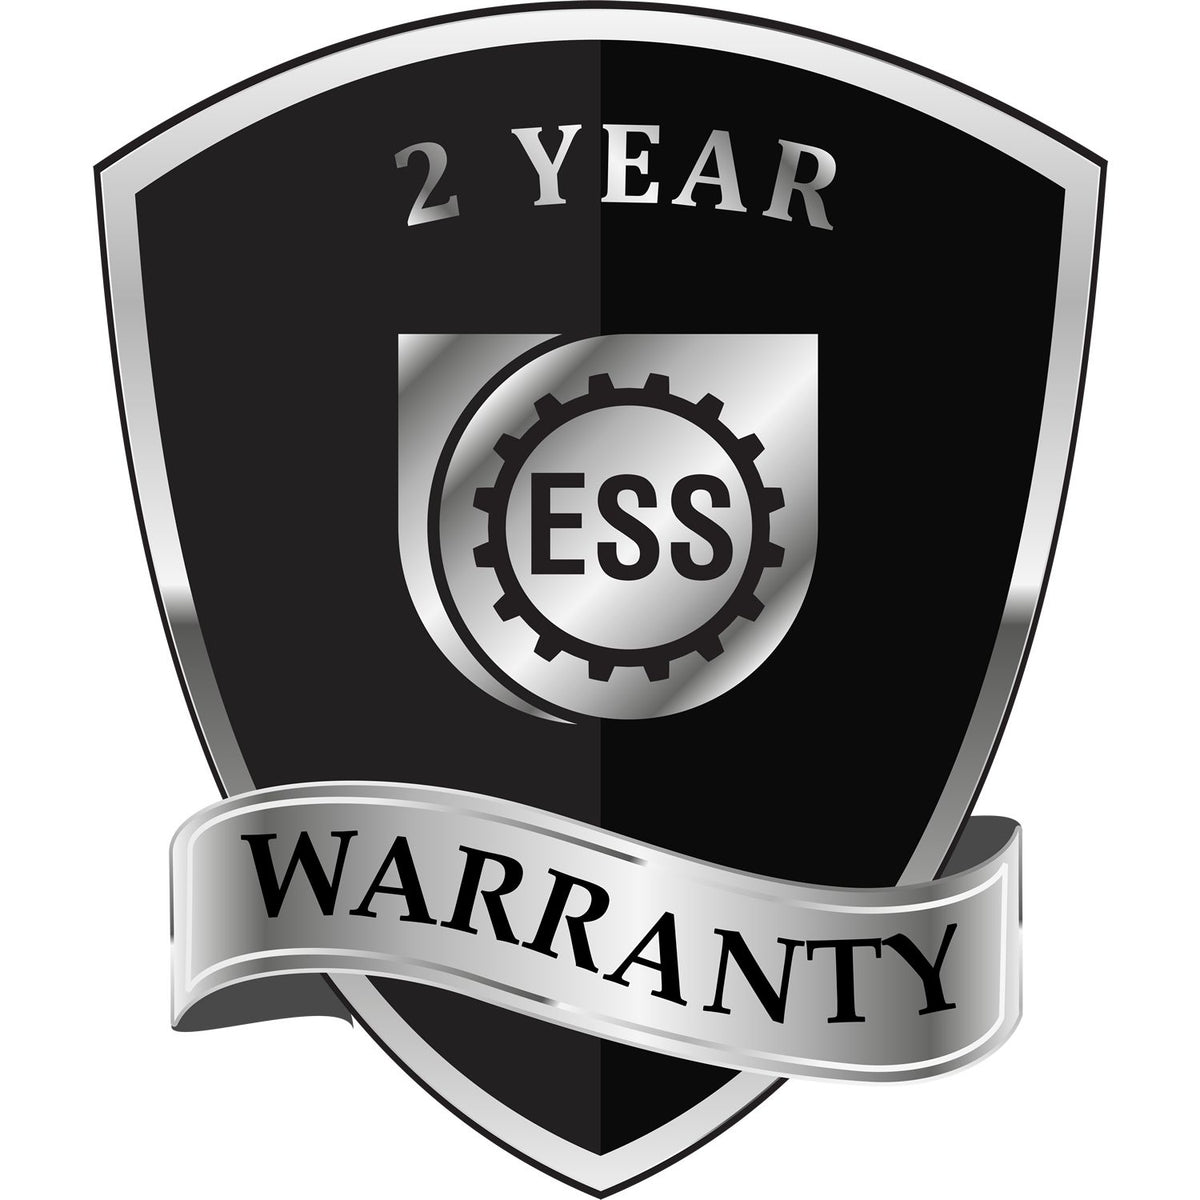 A black and silver badge or emblem showing warranty information for the Gift Colorado Architect Seal